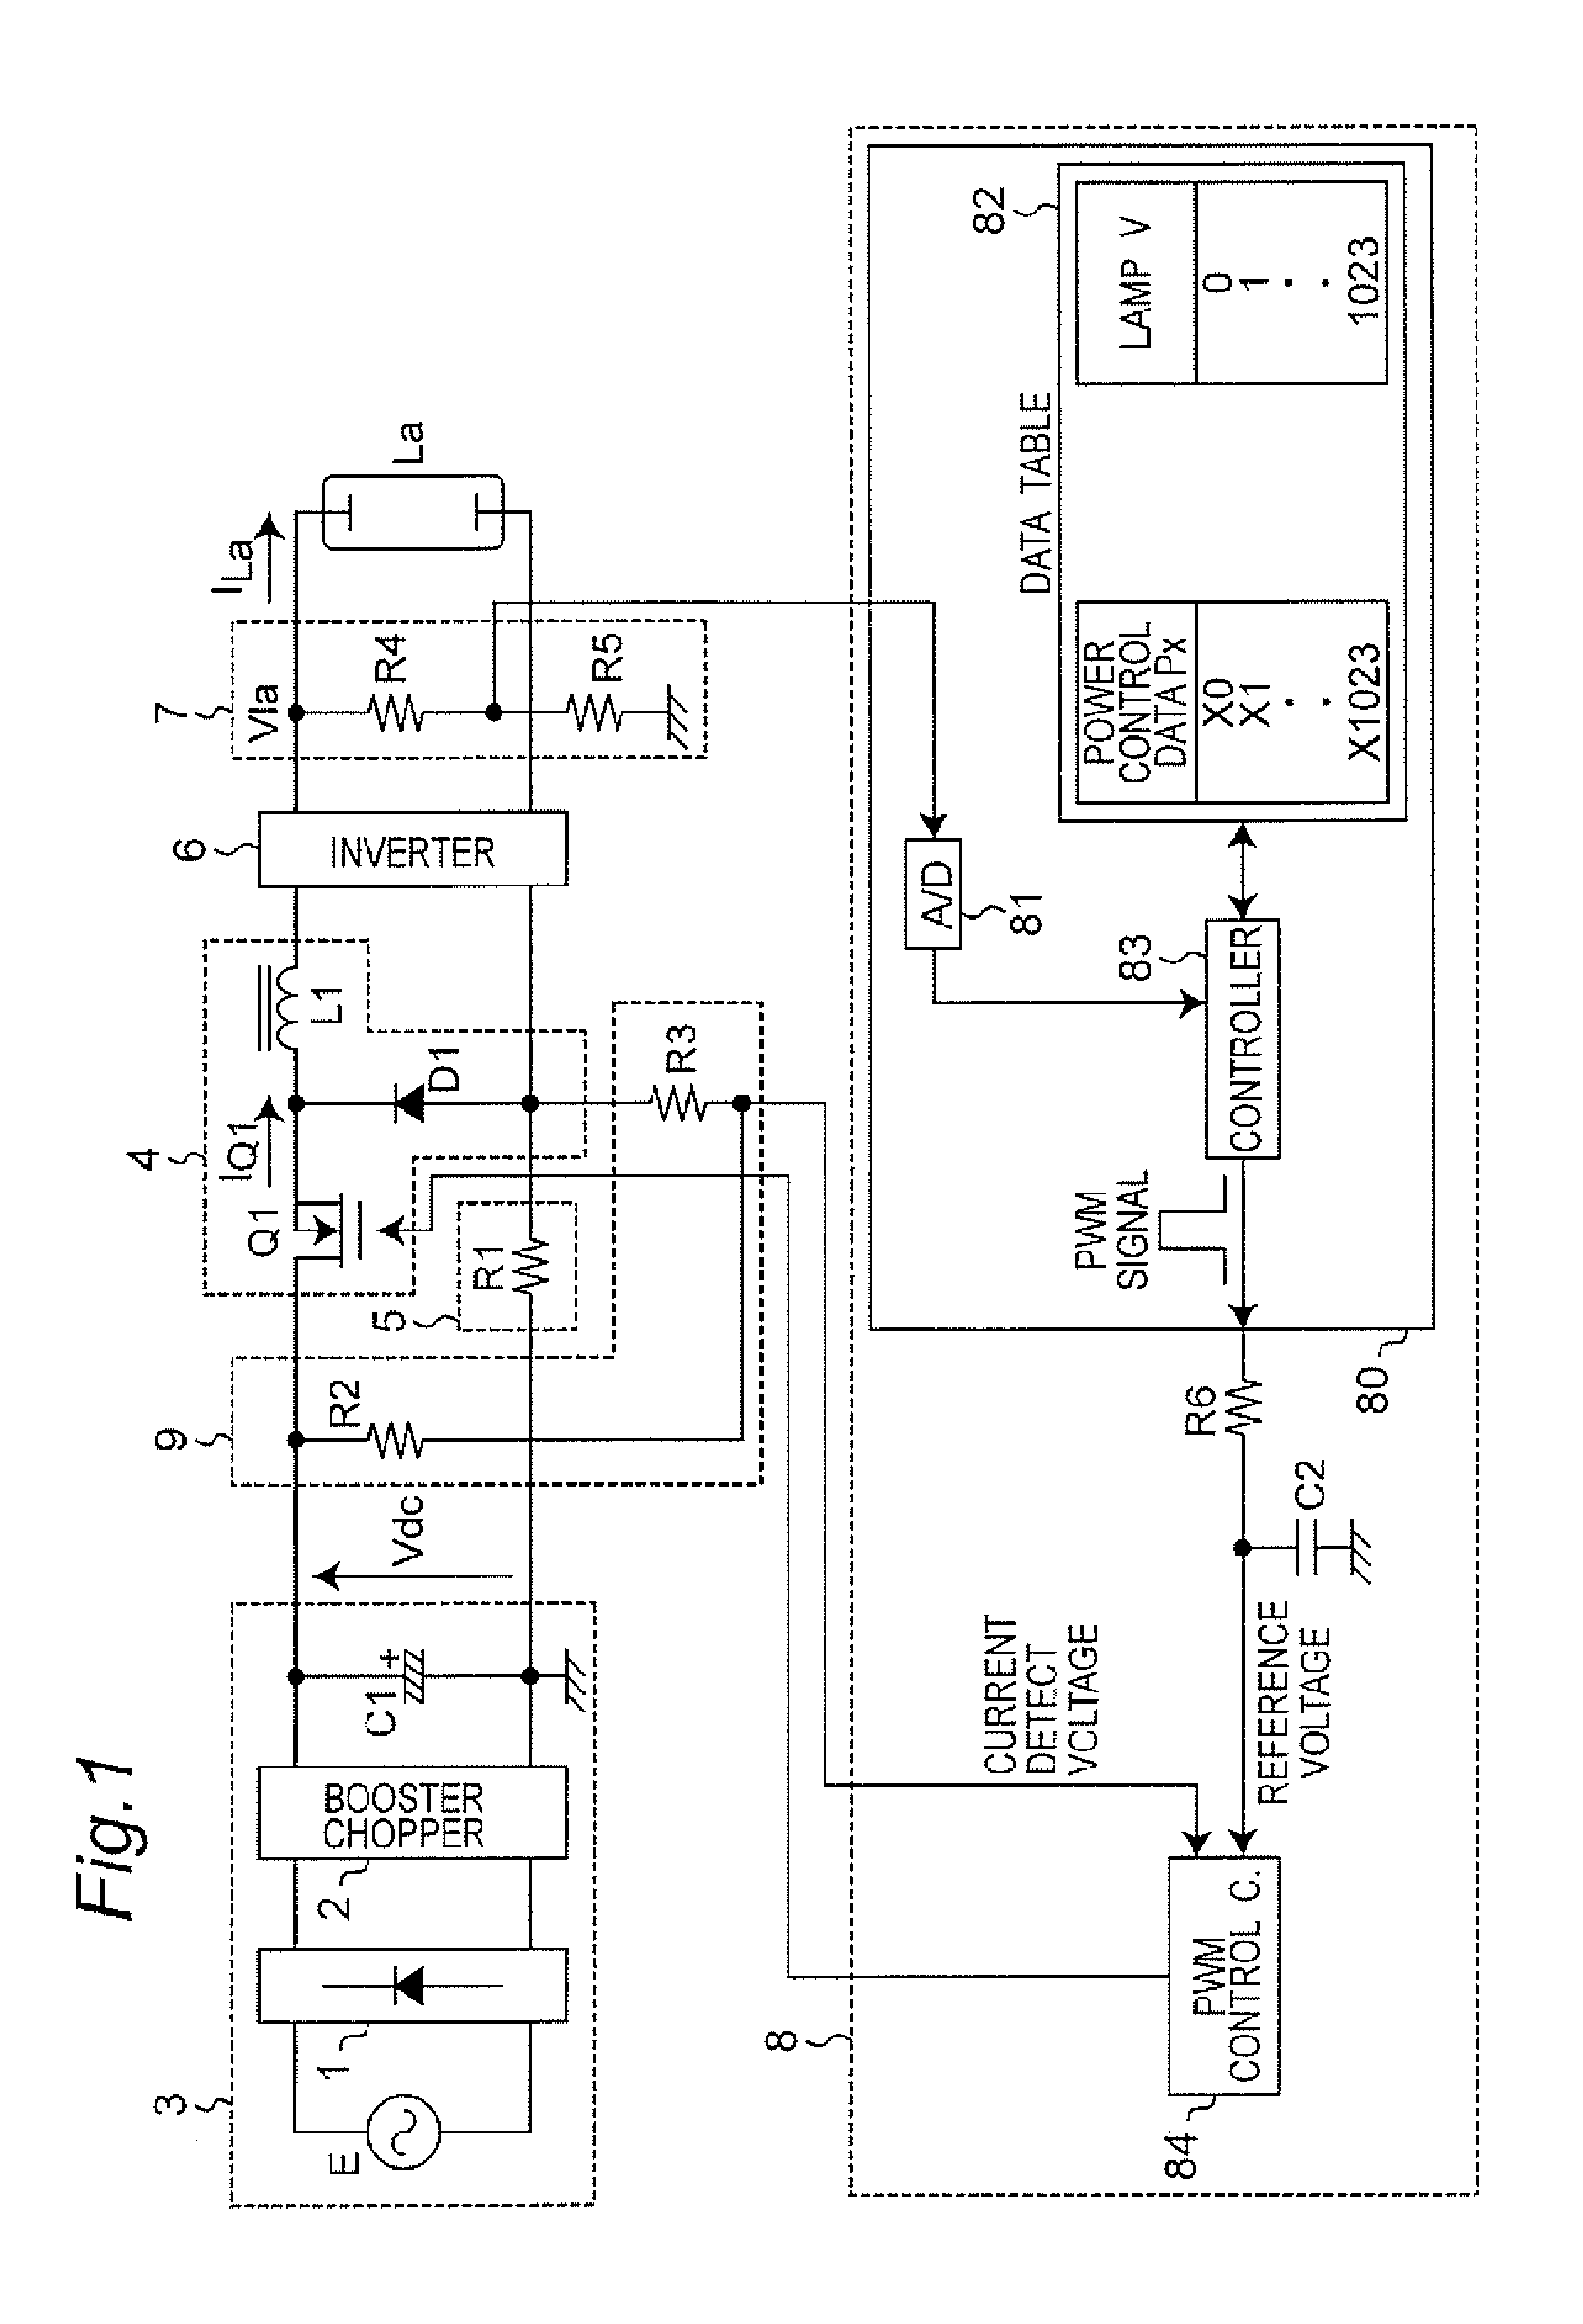 Discharge Lamp Lighting Apparatus and Projector